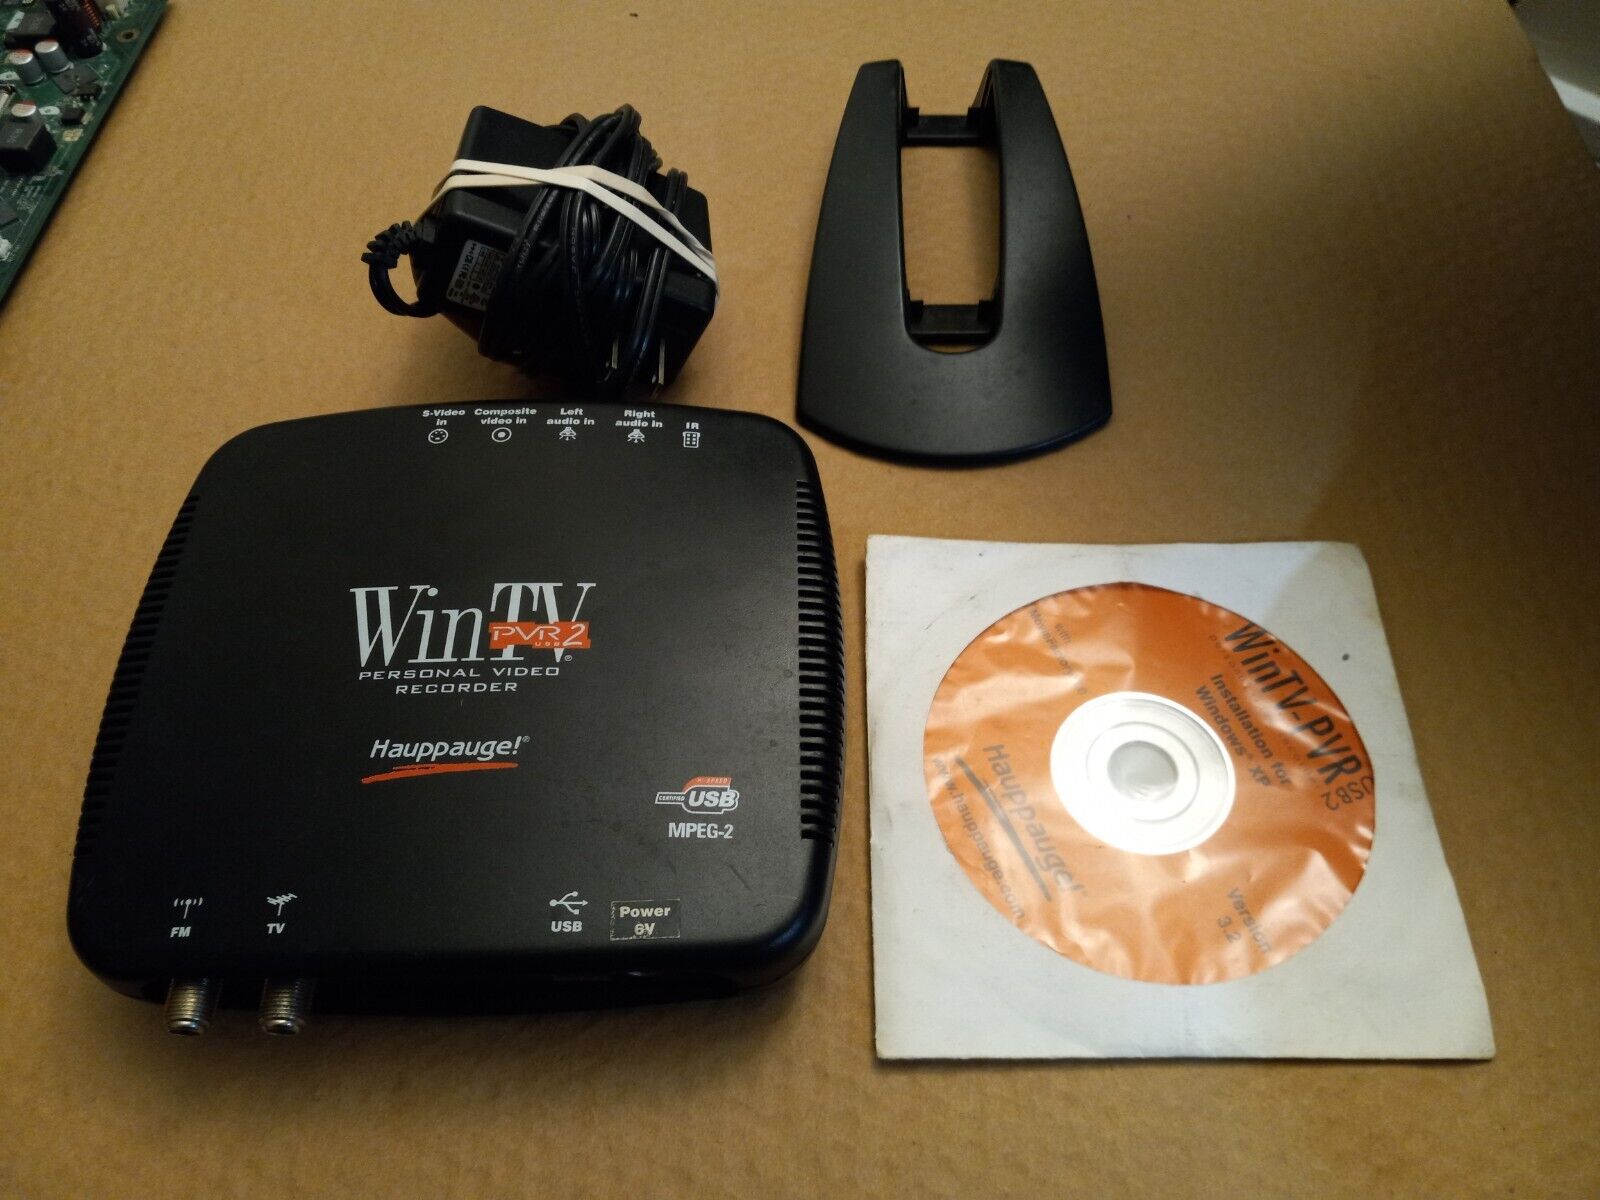 Hauppauge WinTV-PVR2 MCE Edition USB2 Personal Video Recorder - Used